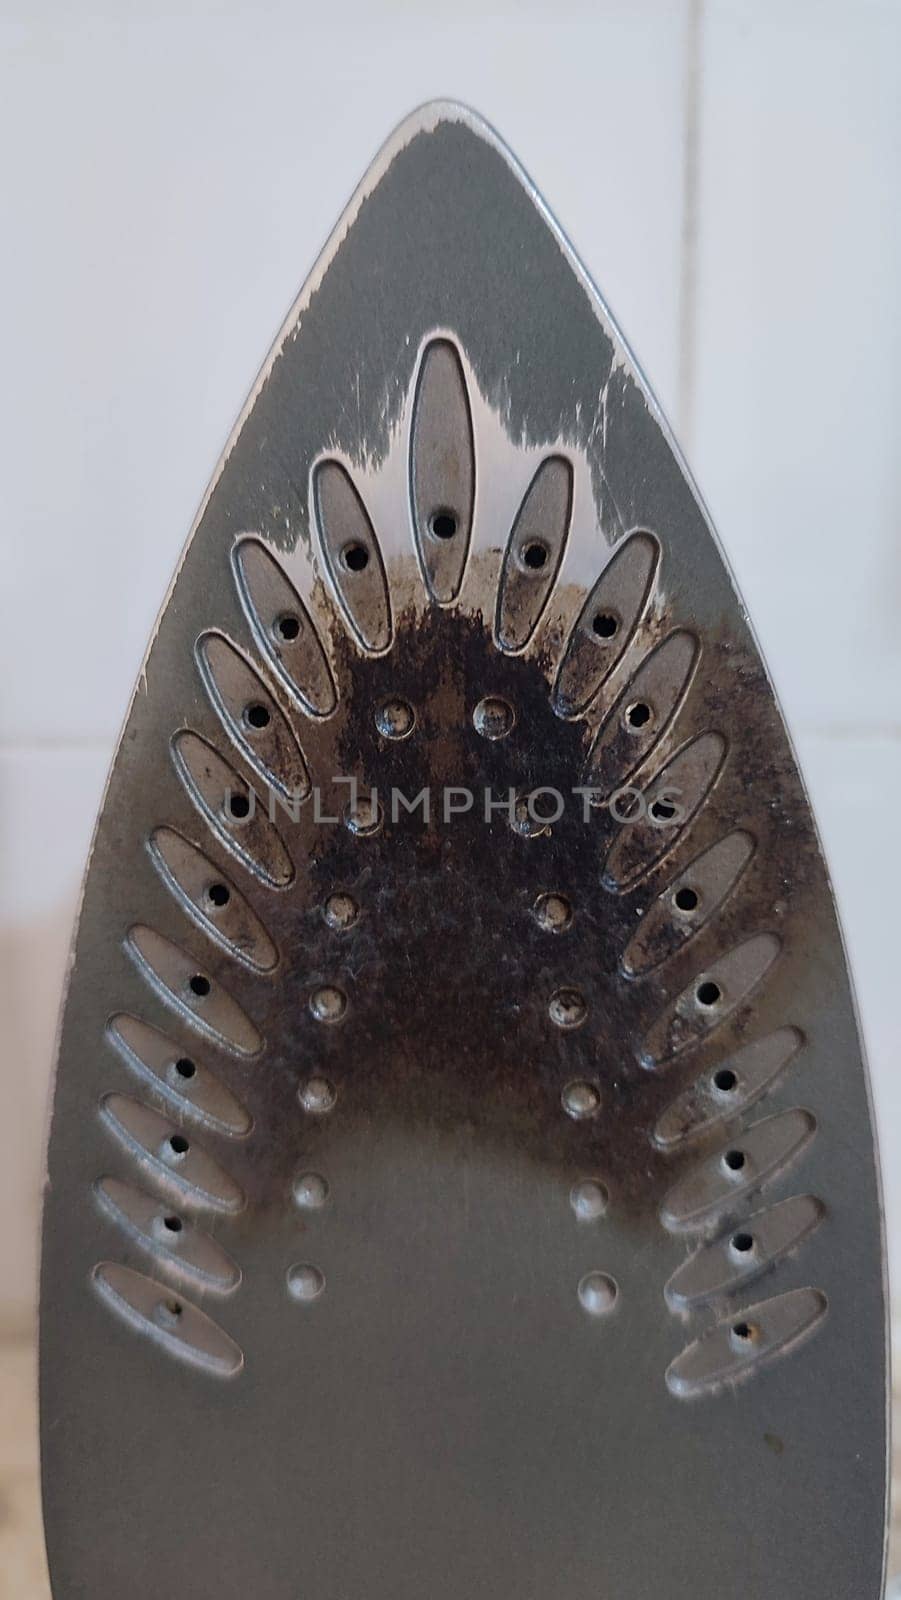 iron, metal sole burnt, object. High quality FullHD footage